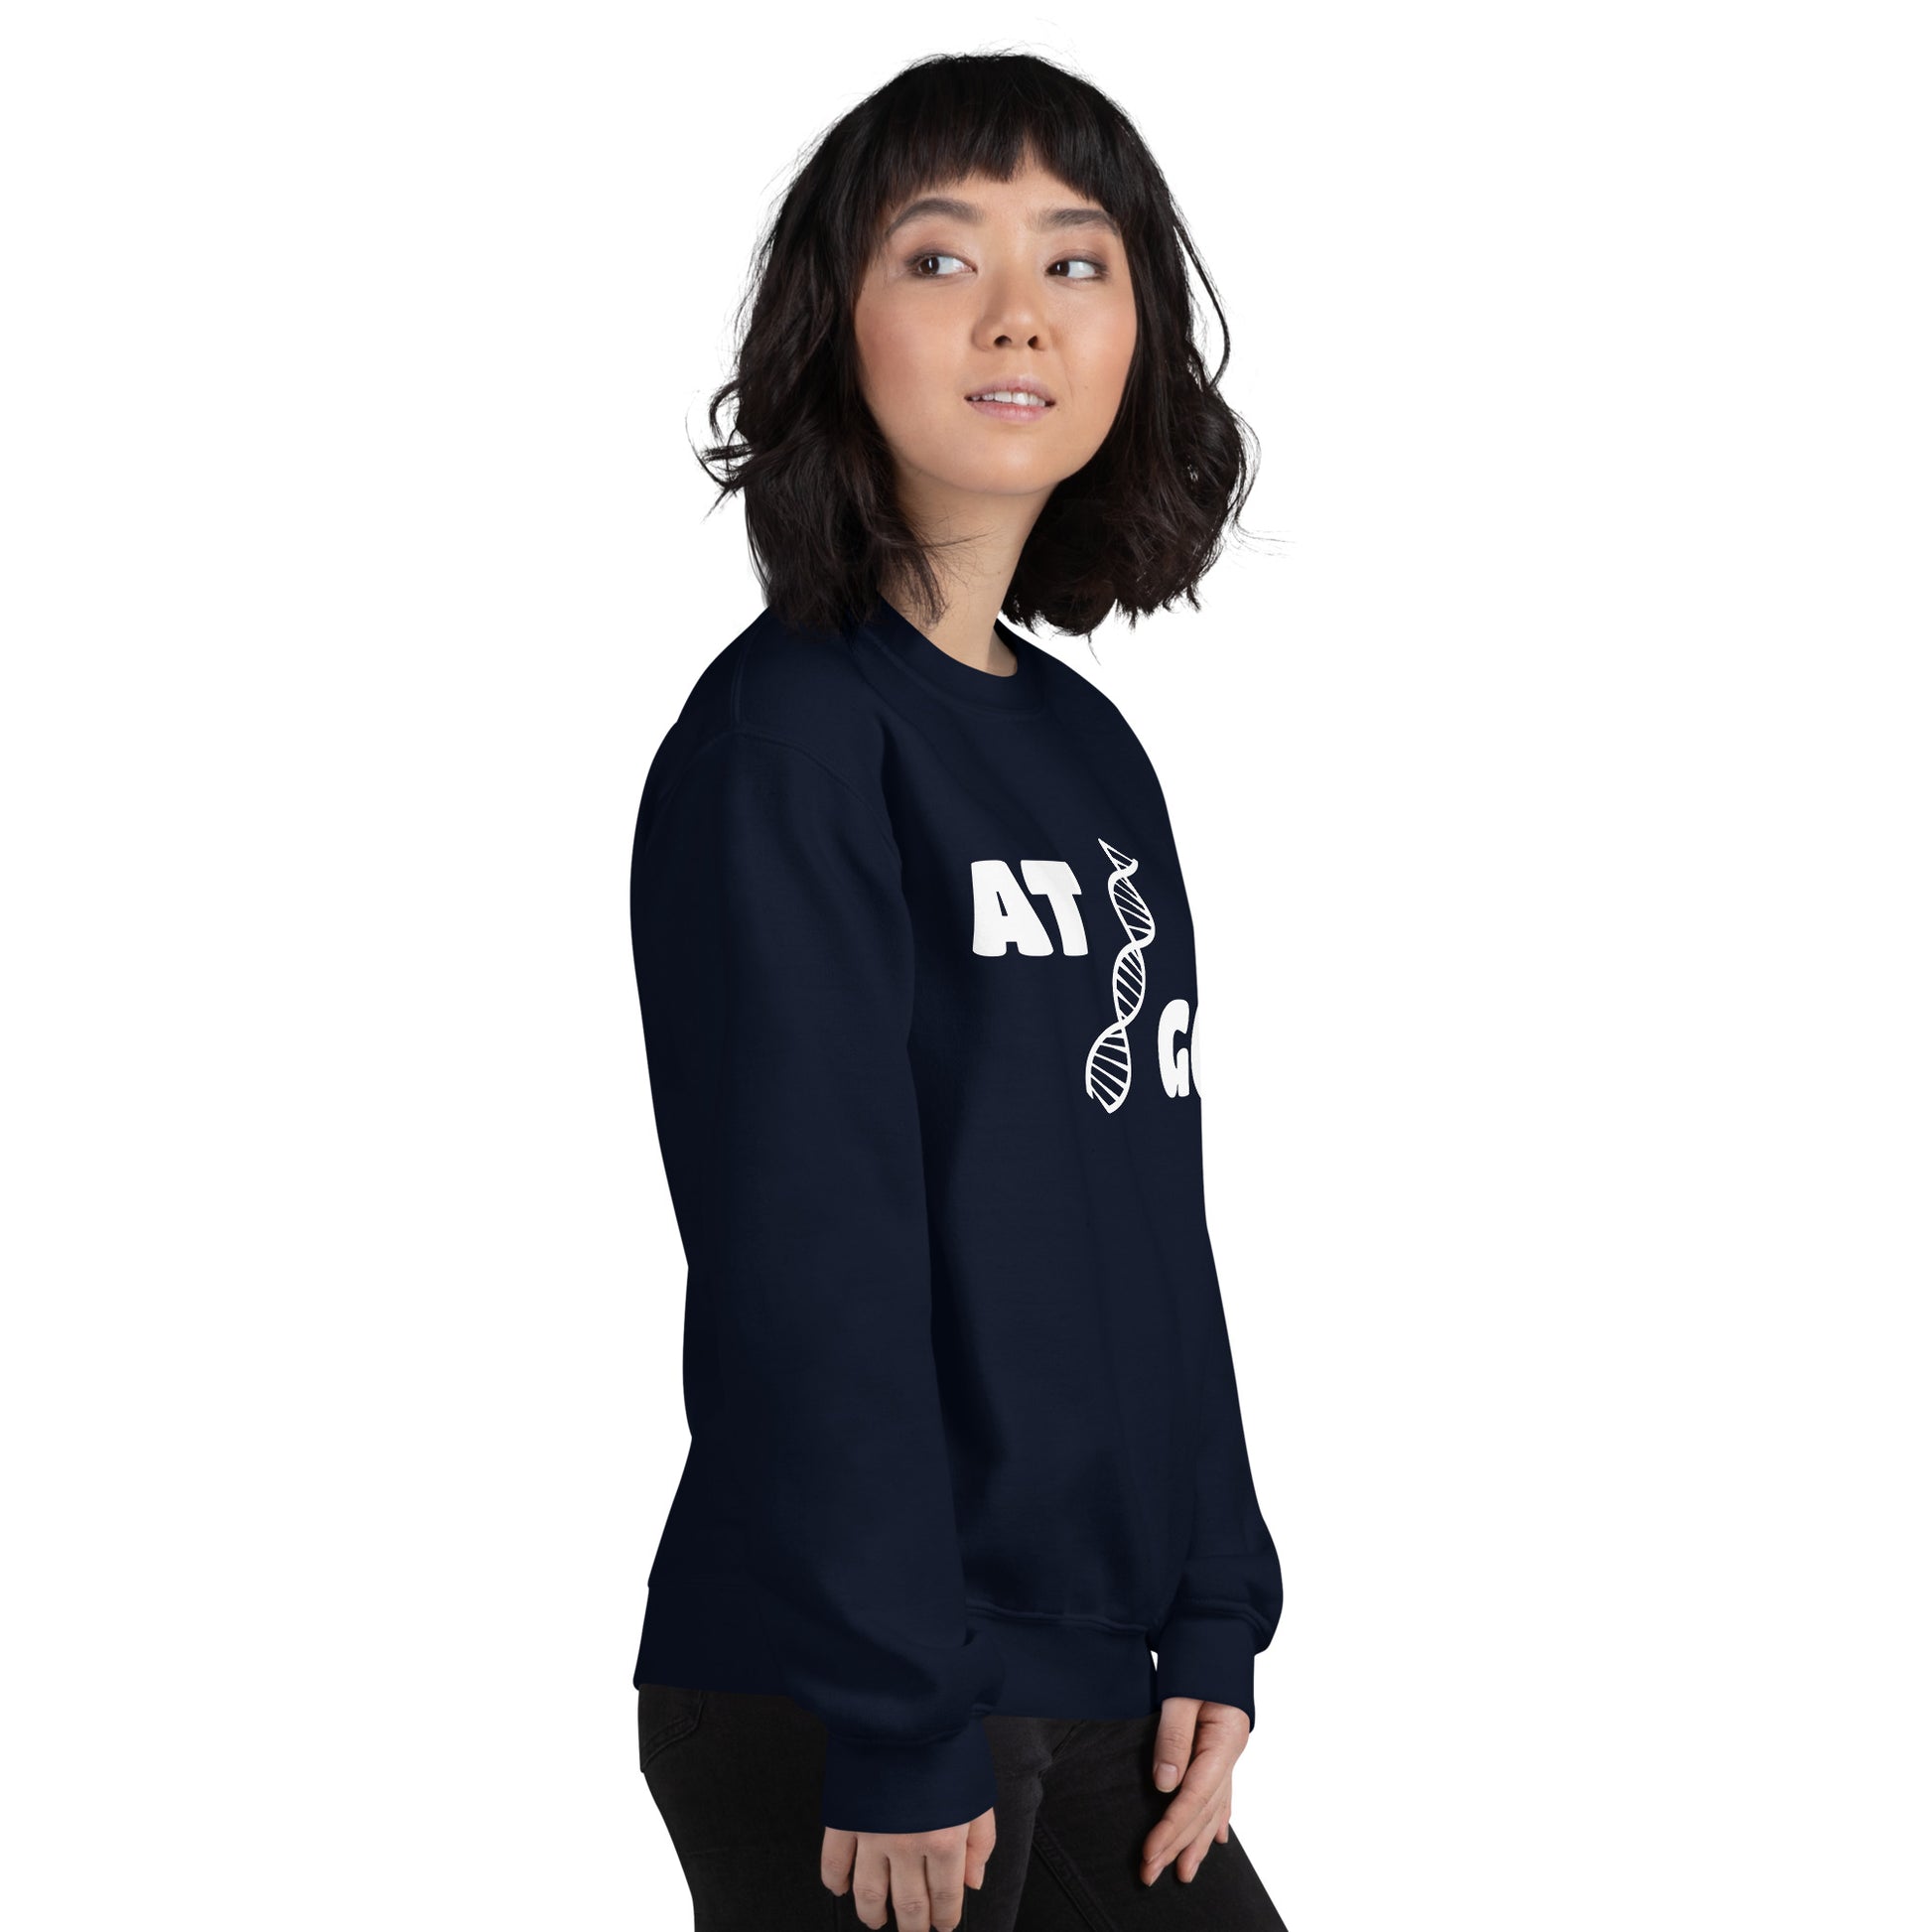 Women with navy blue sweatshirt with image of a DNA string and the text "ATGC"